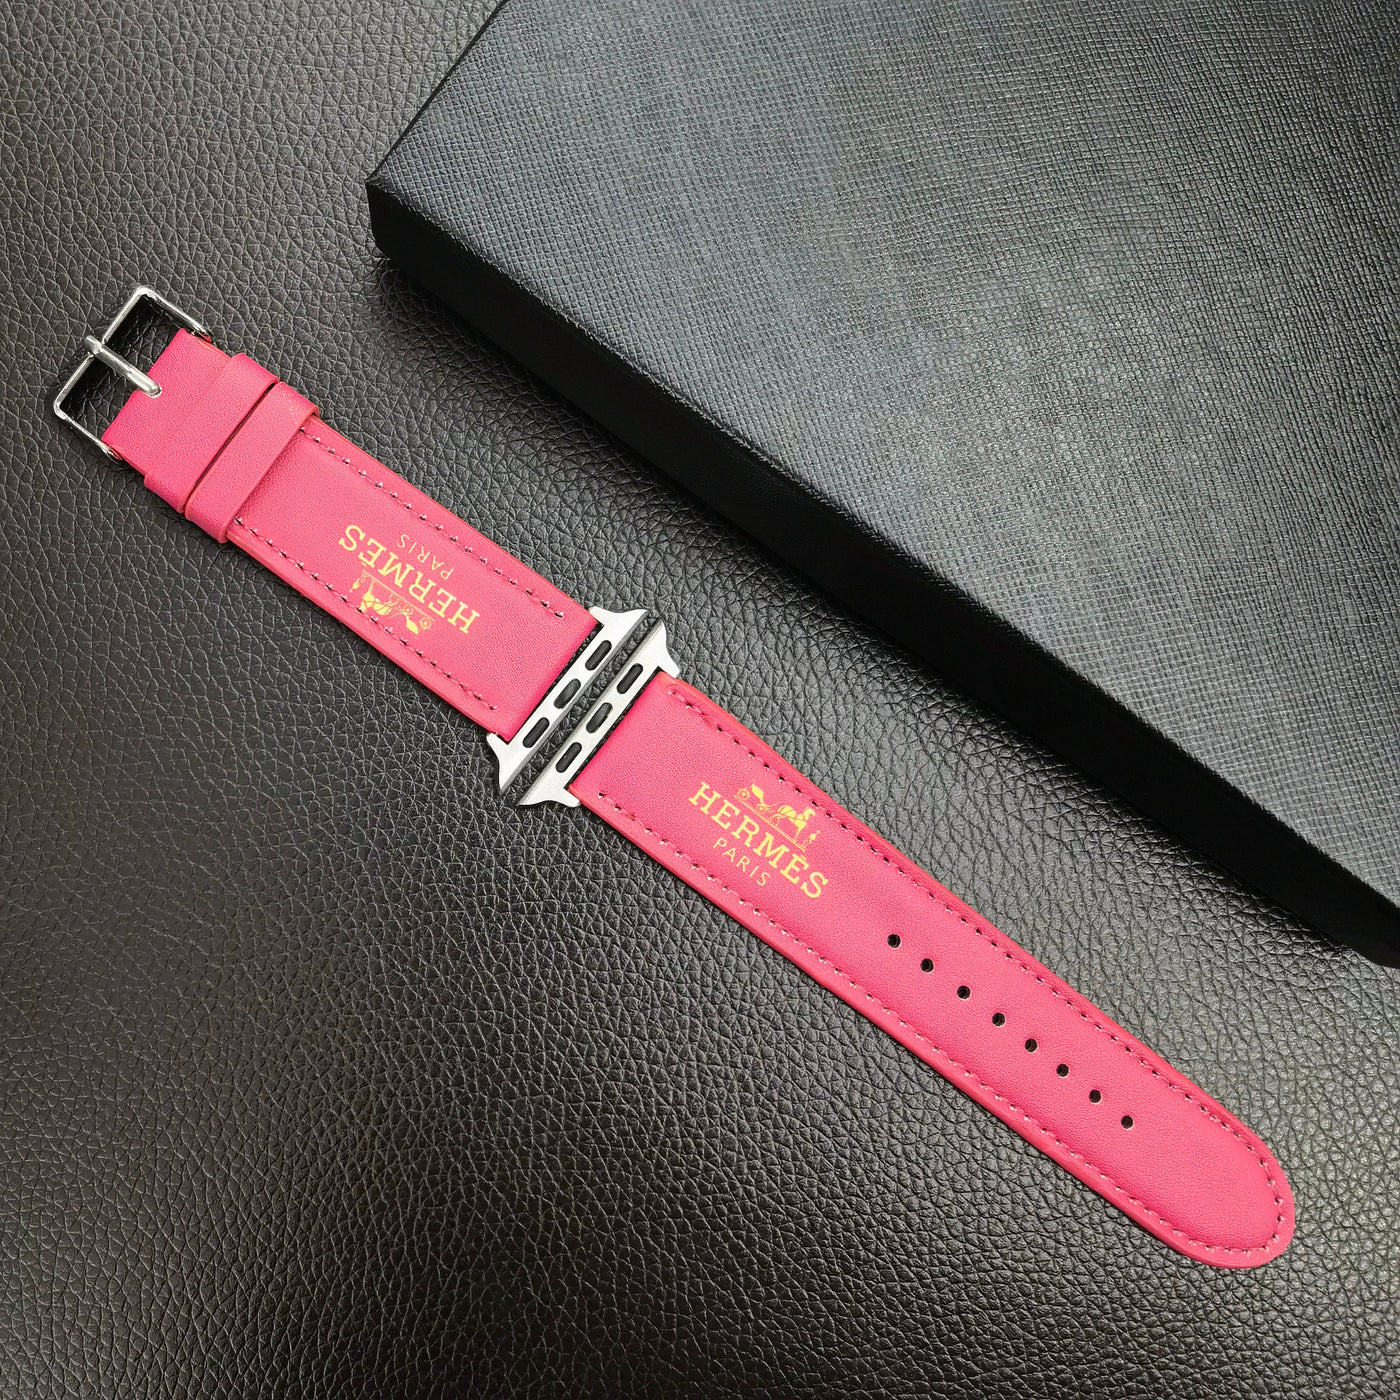 Hermes-inspired band for Apple Watch in a classic design